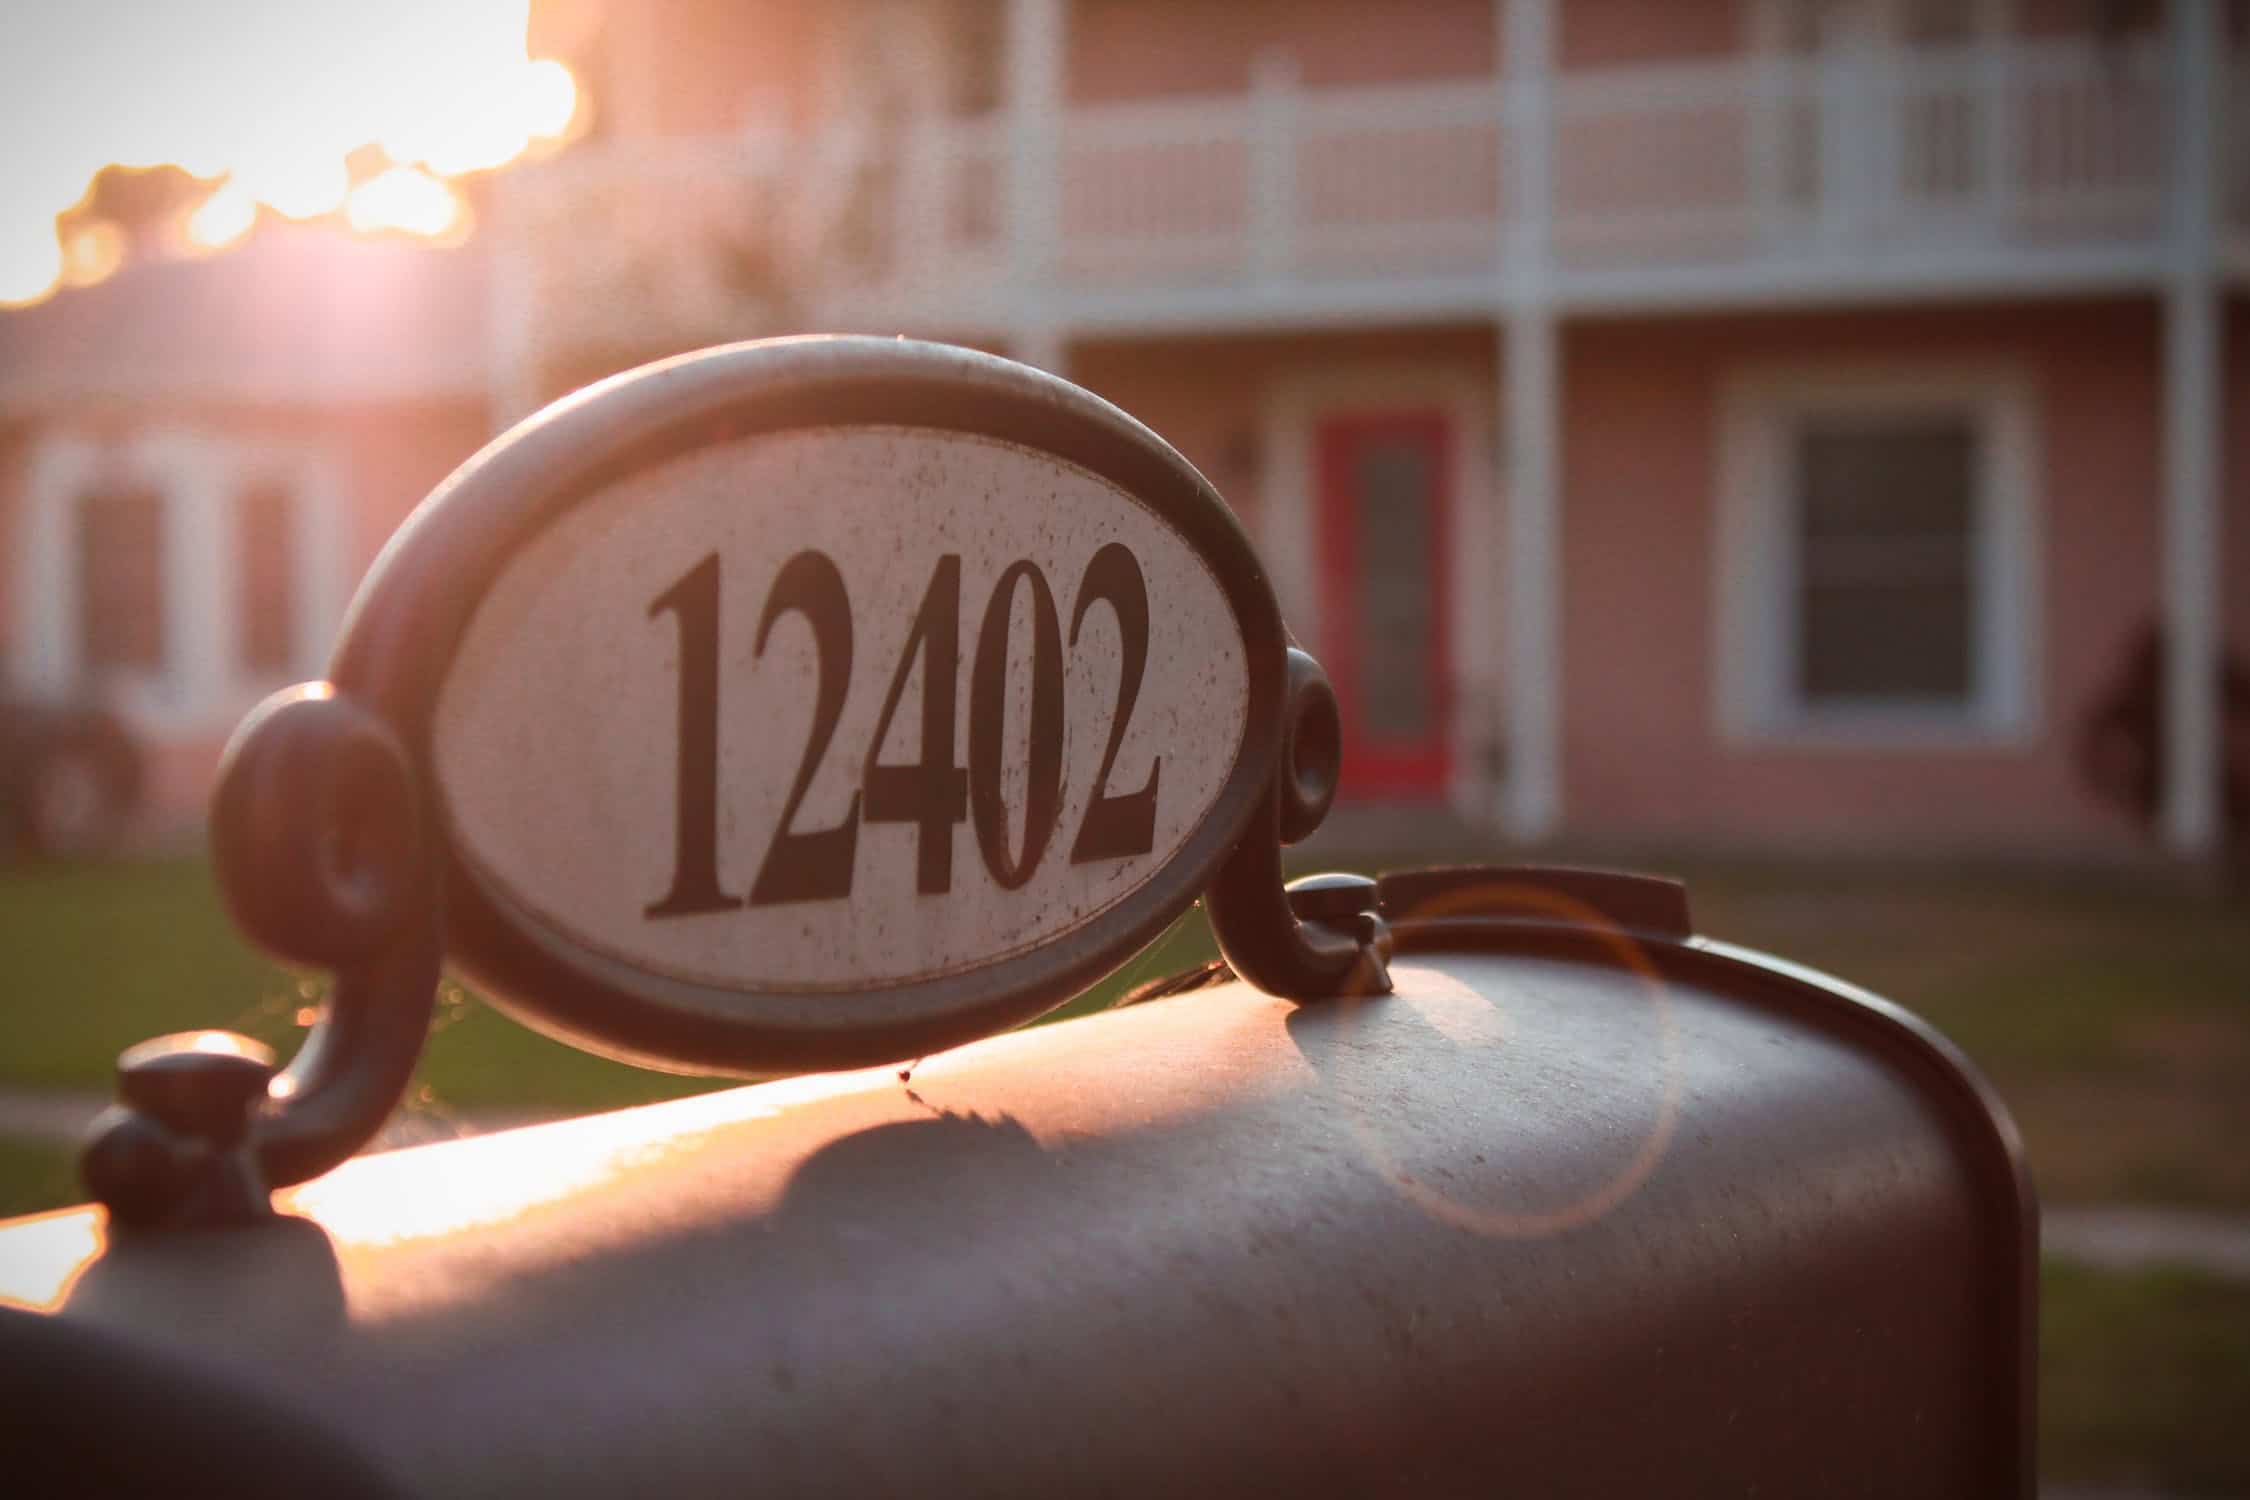 3 Key Tips for Choosing Highly Visible House Numbers